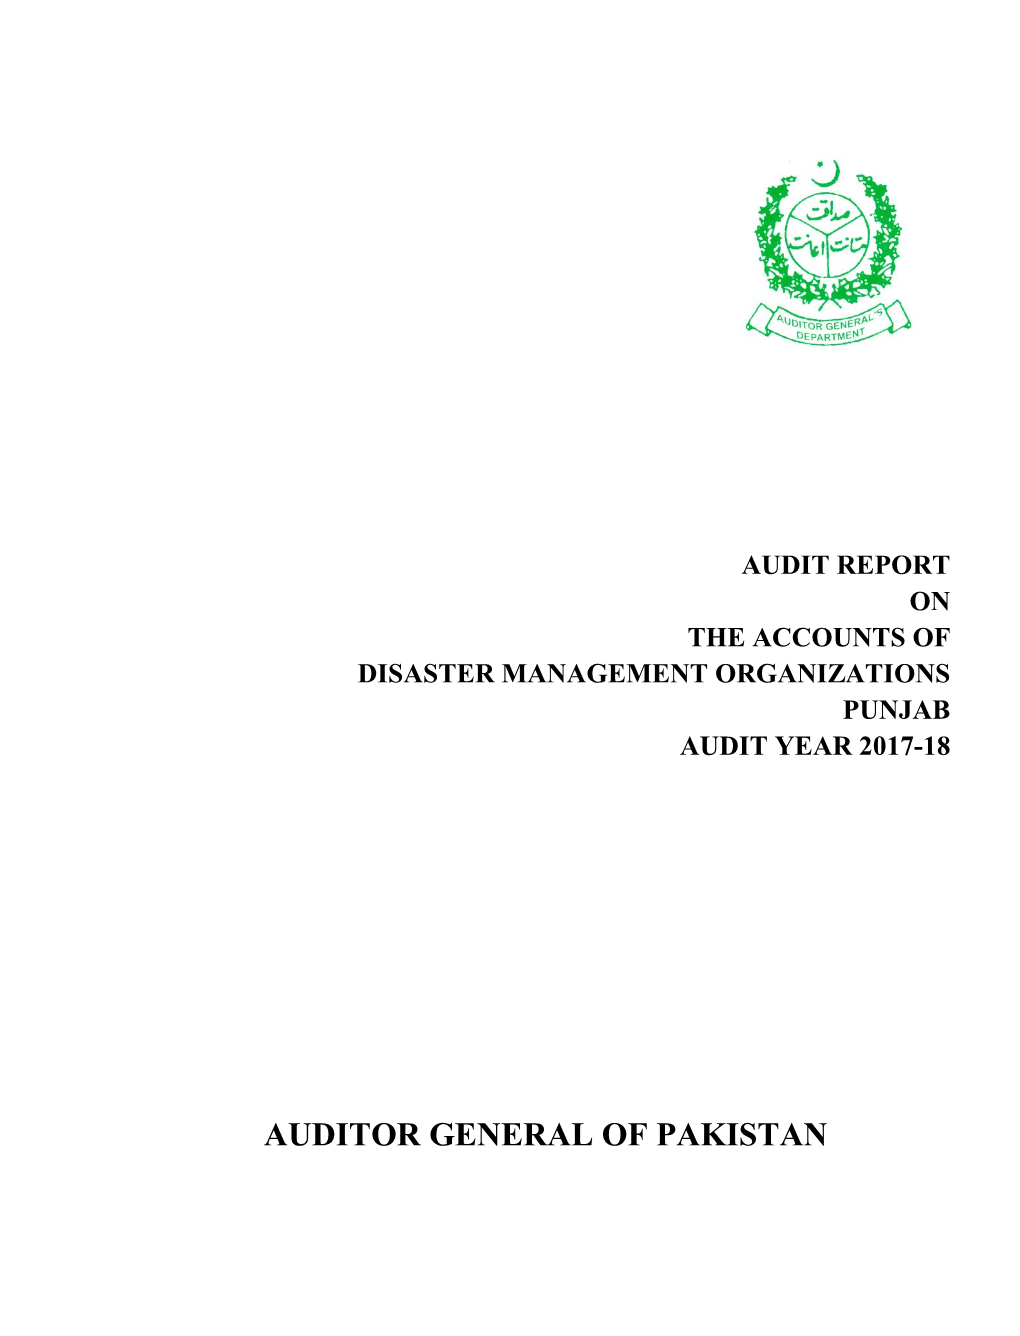 Audit Report on the Accounts of Disaster Management Organizations Punjab Audit Year 2017-18